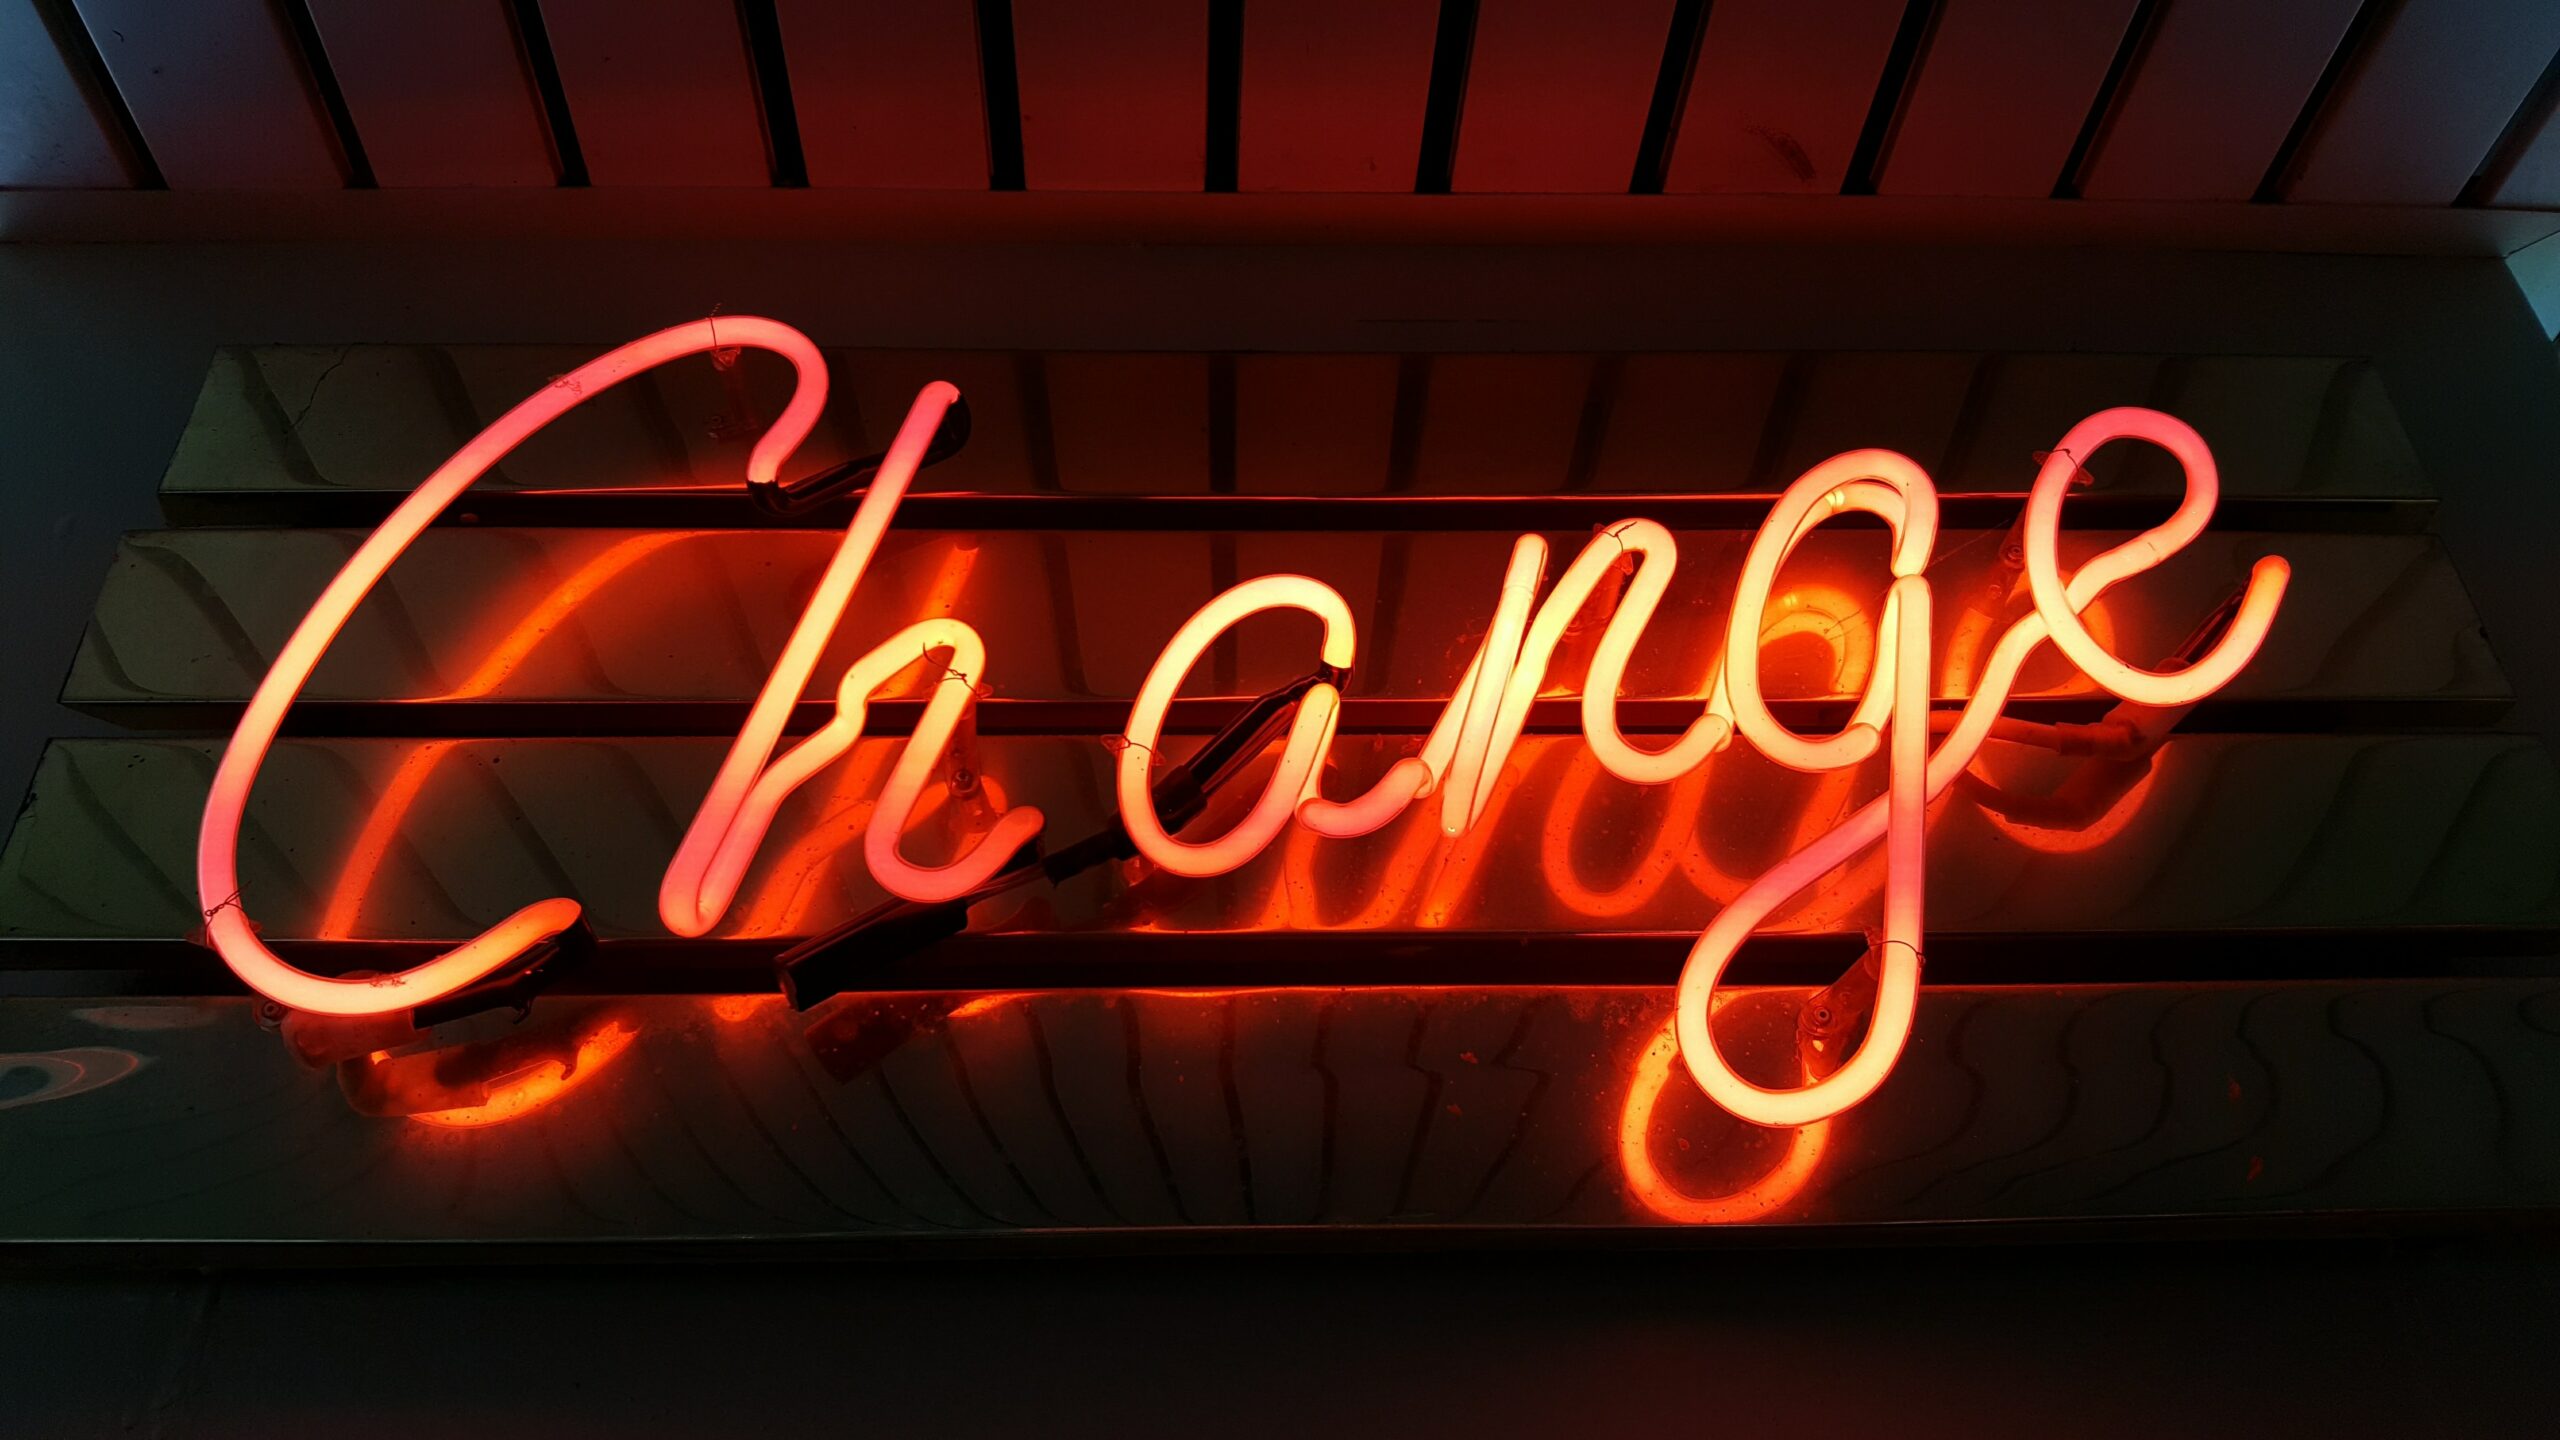 Leading Change: It’s Not as Difficult as You Think